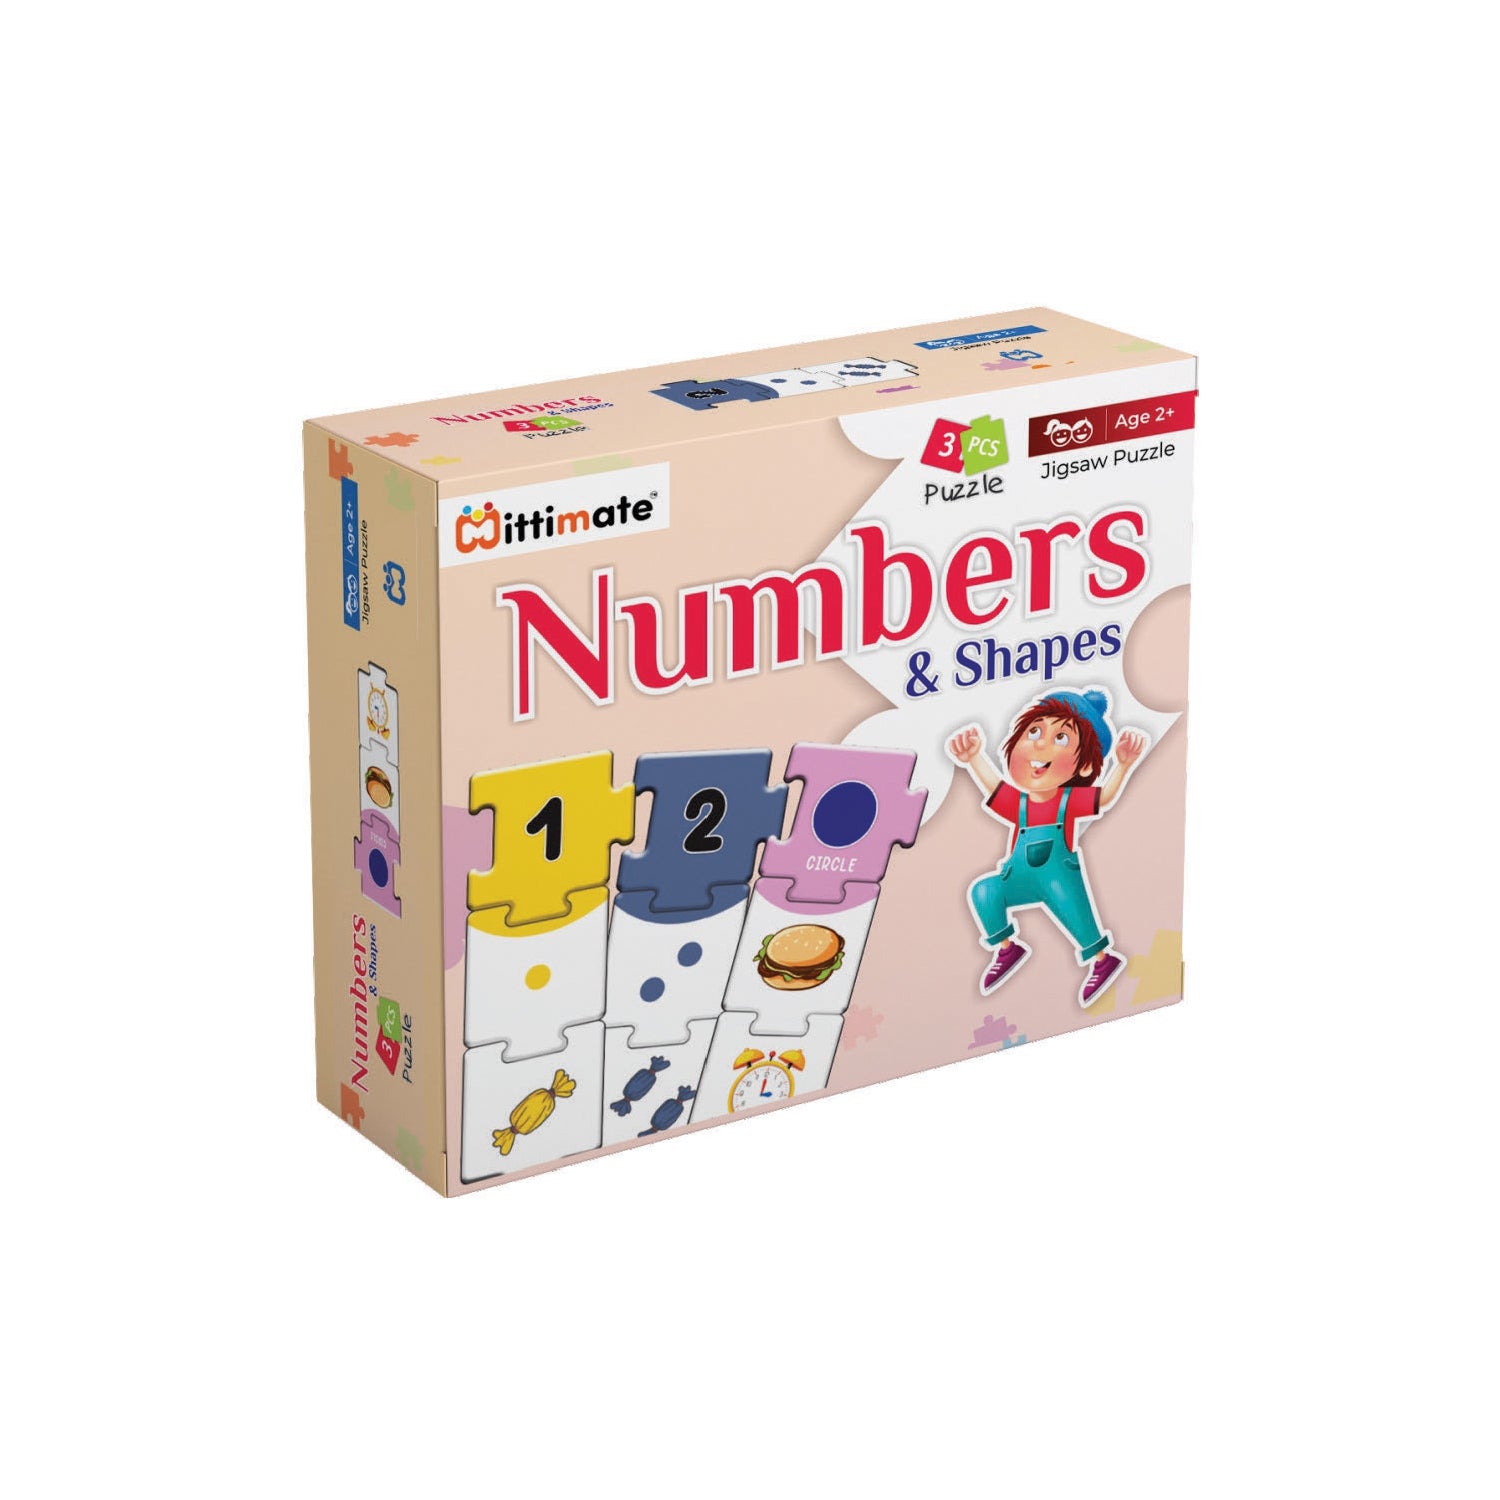 3 Pcs Number & Shapes Jigsaw Puzzle | Fun & Learning Games for kids